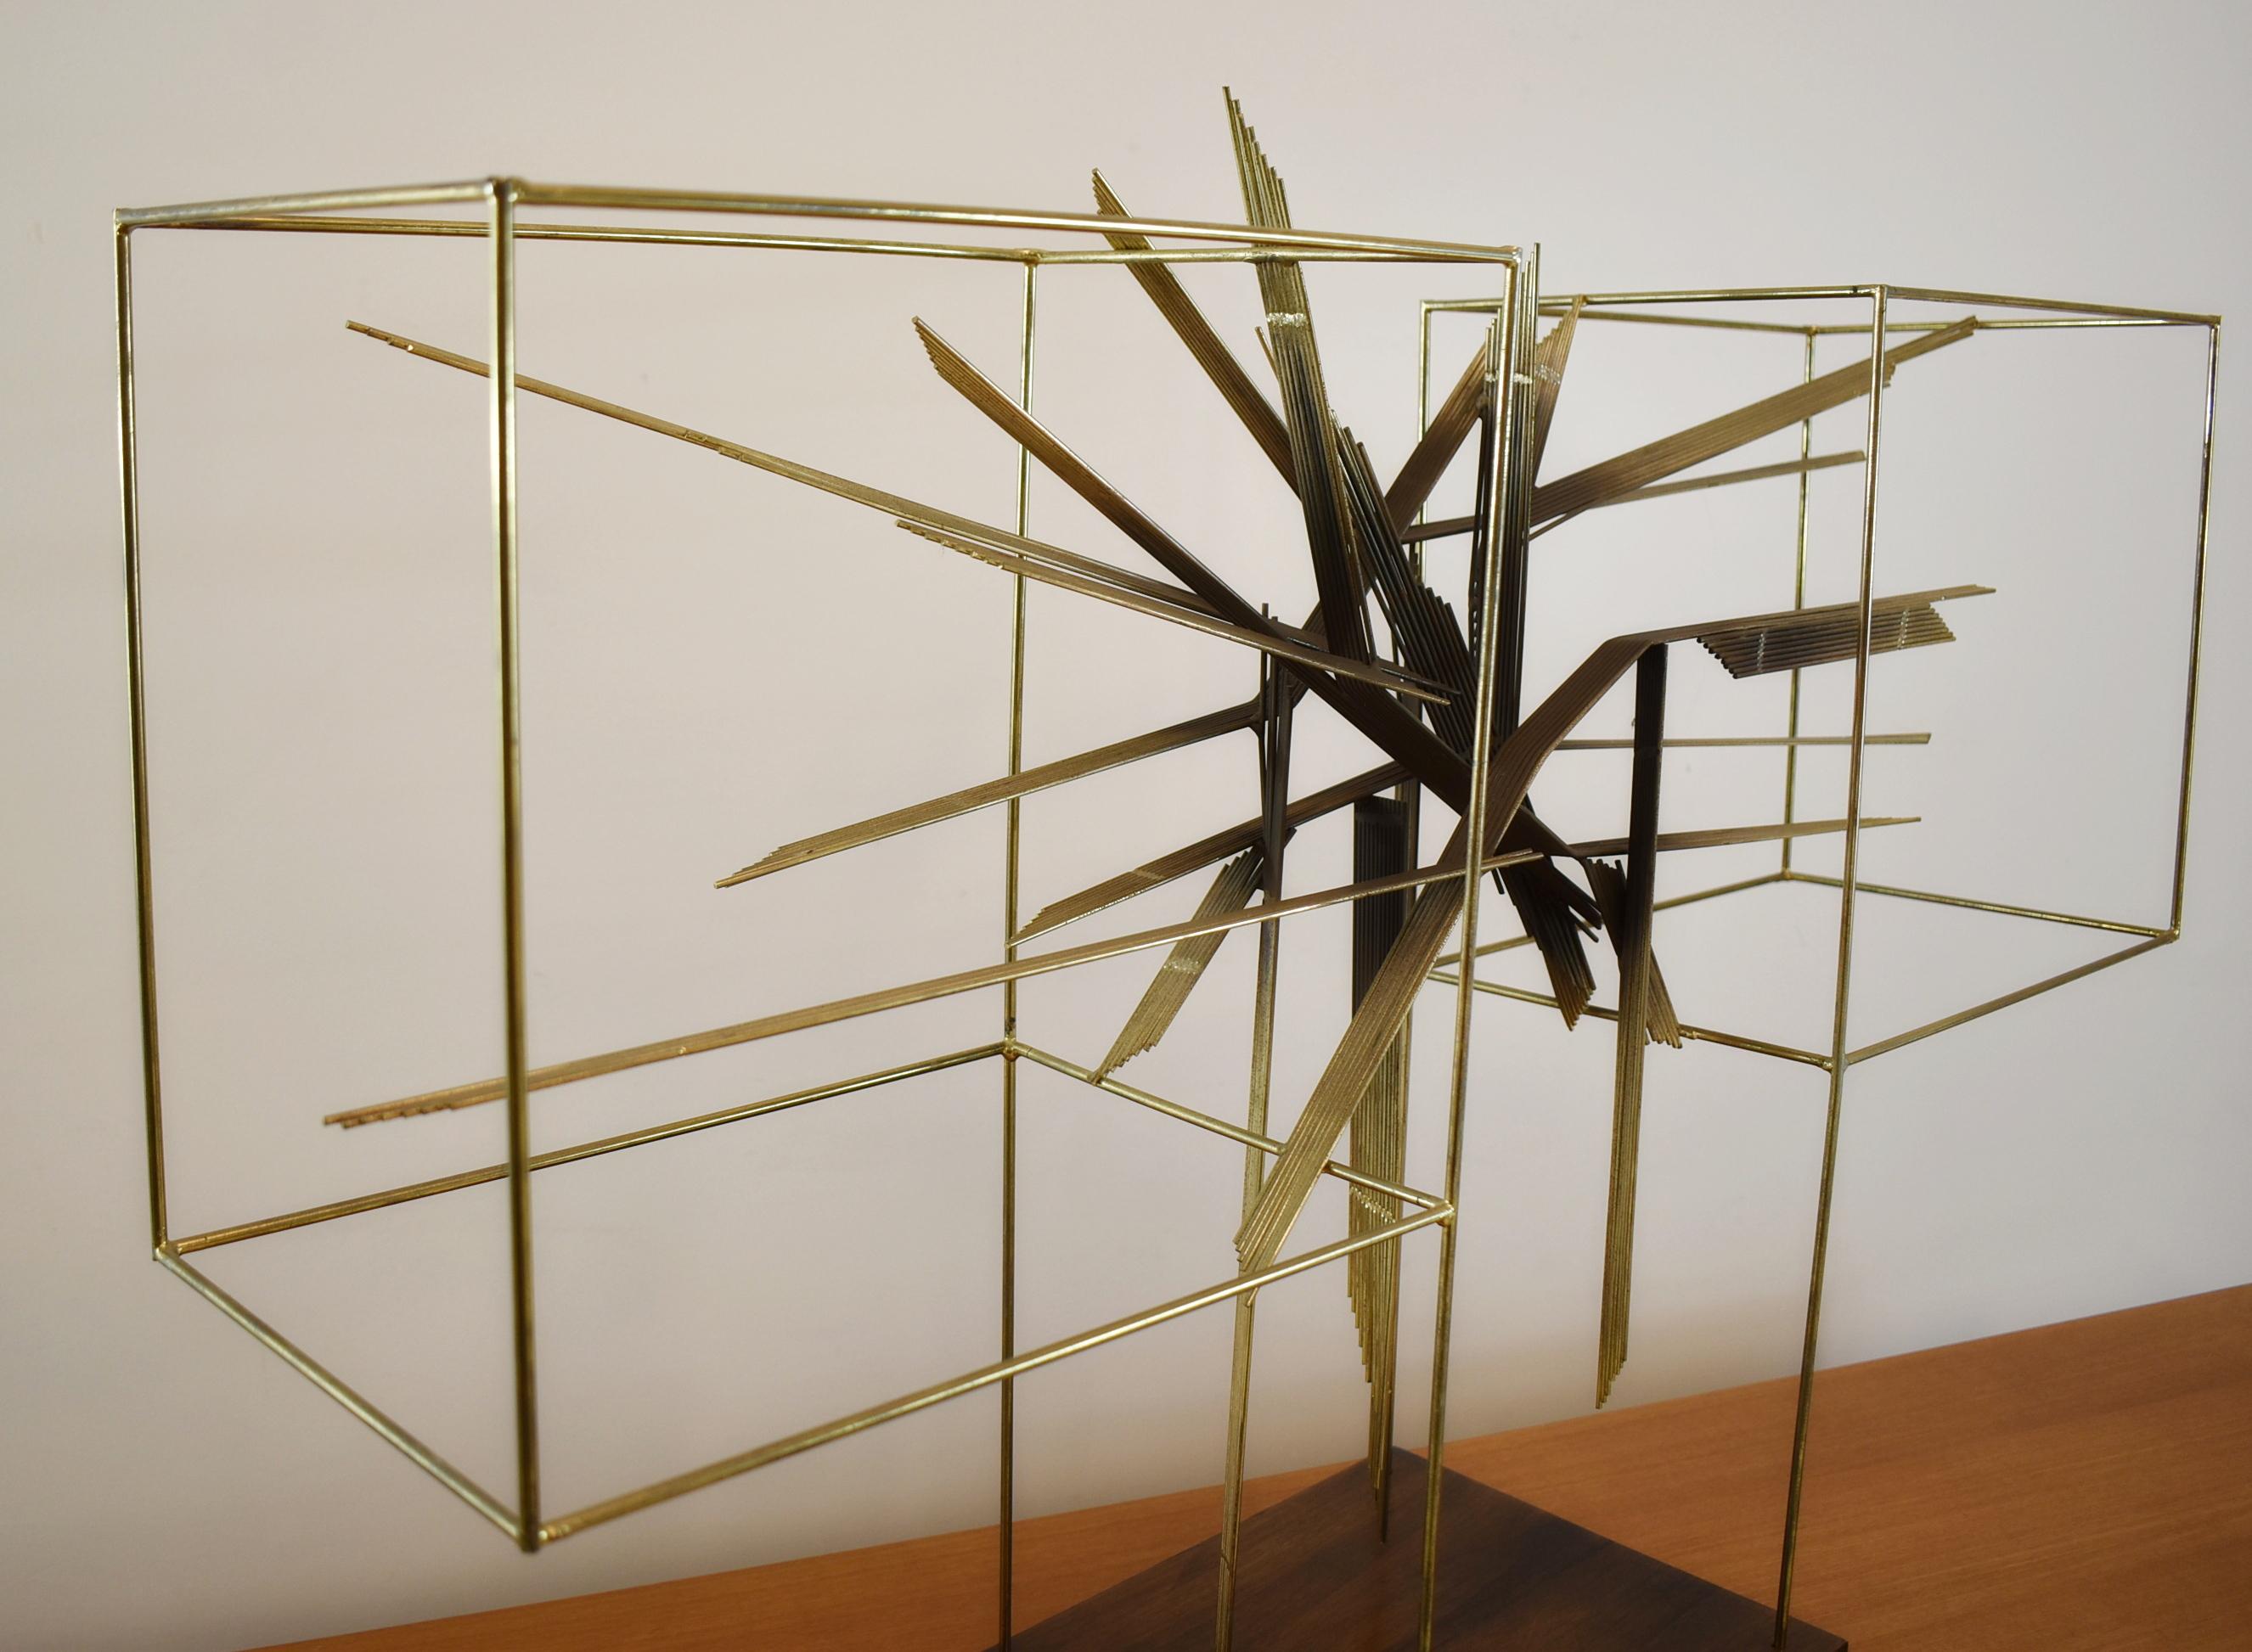 Curtis Jere sculpture, two wire square with an inner area of stacked rods in varying positions, sits on a wood base, signed, circa 1978.

Dimensions: 37